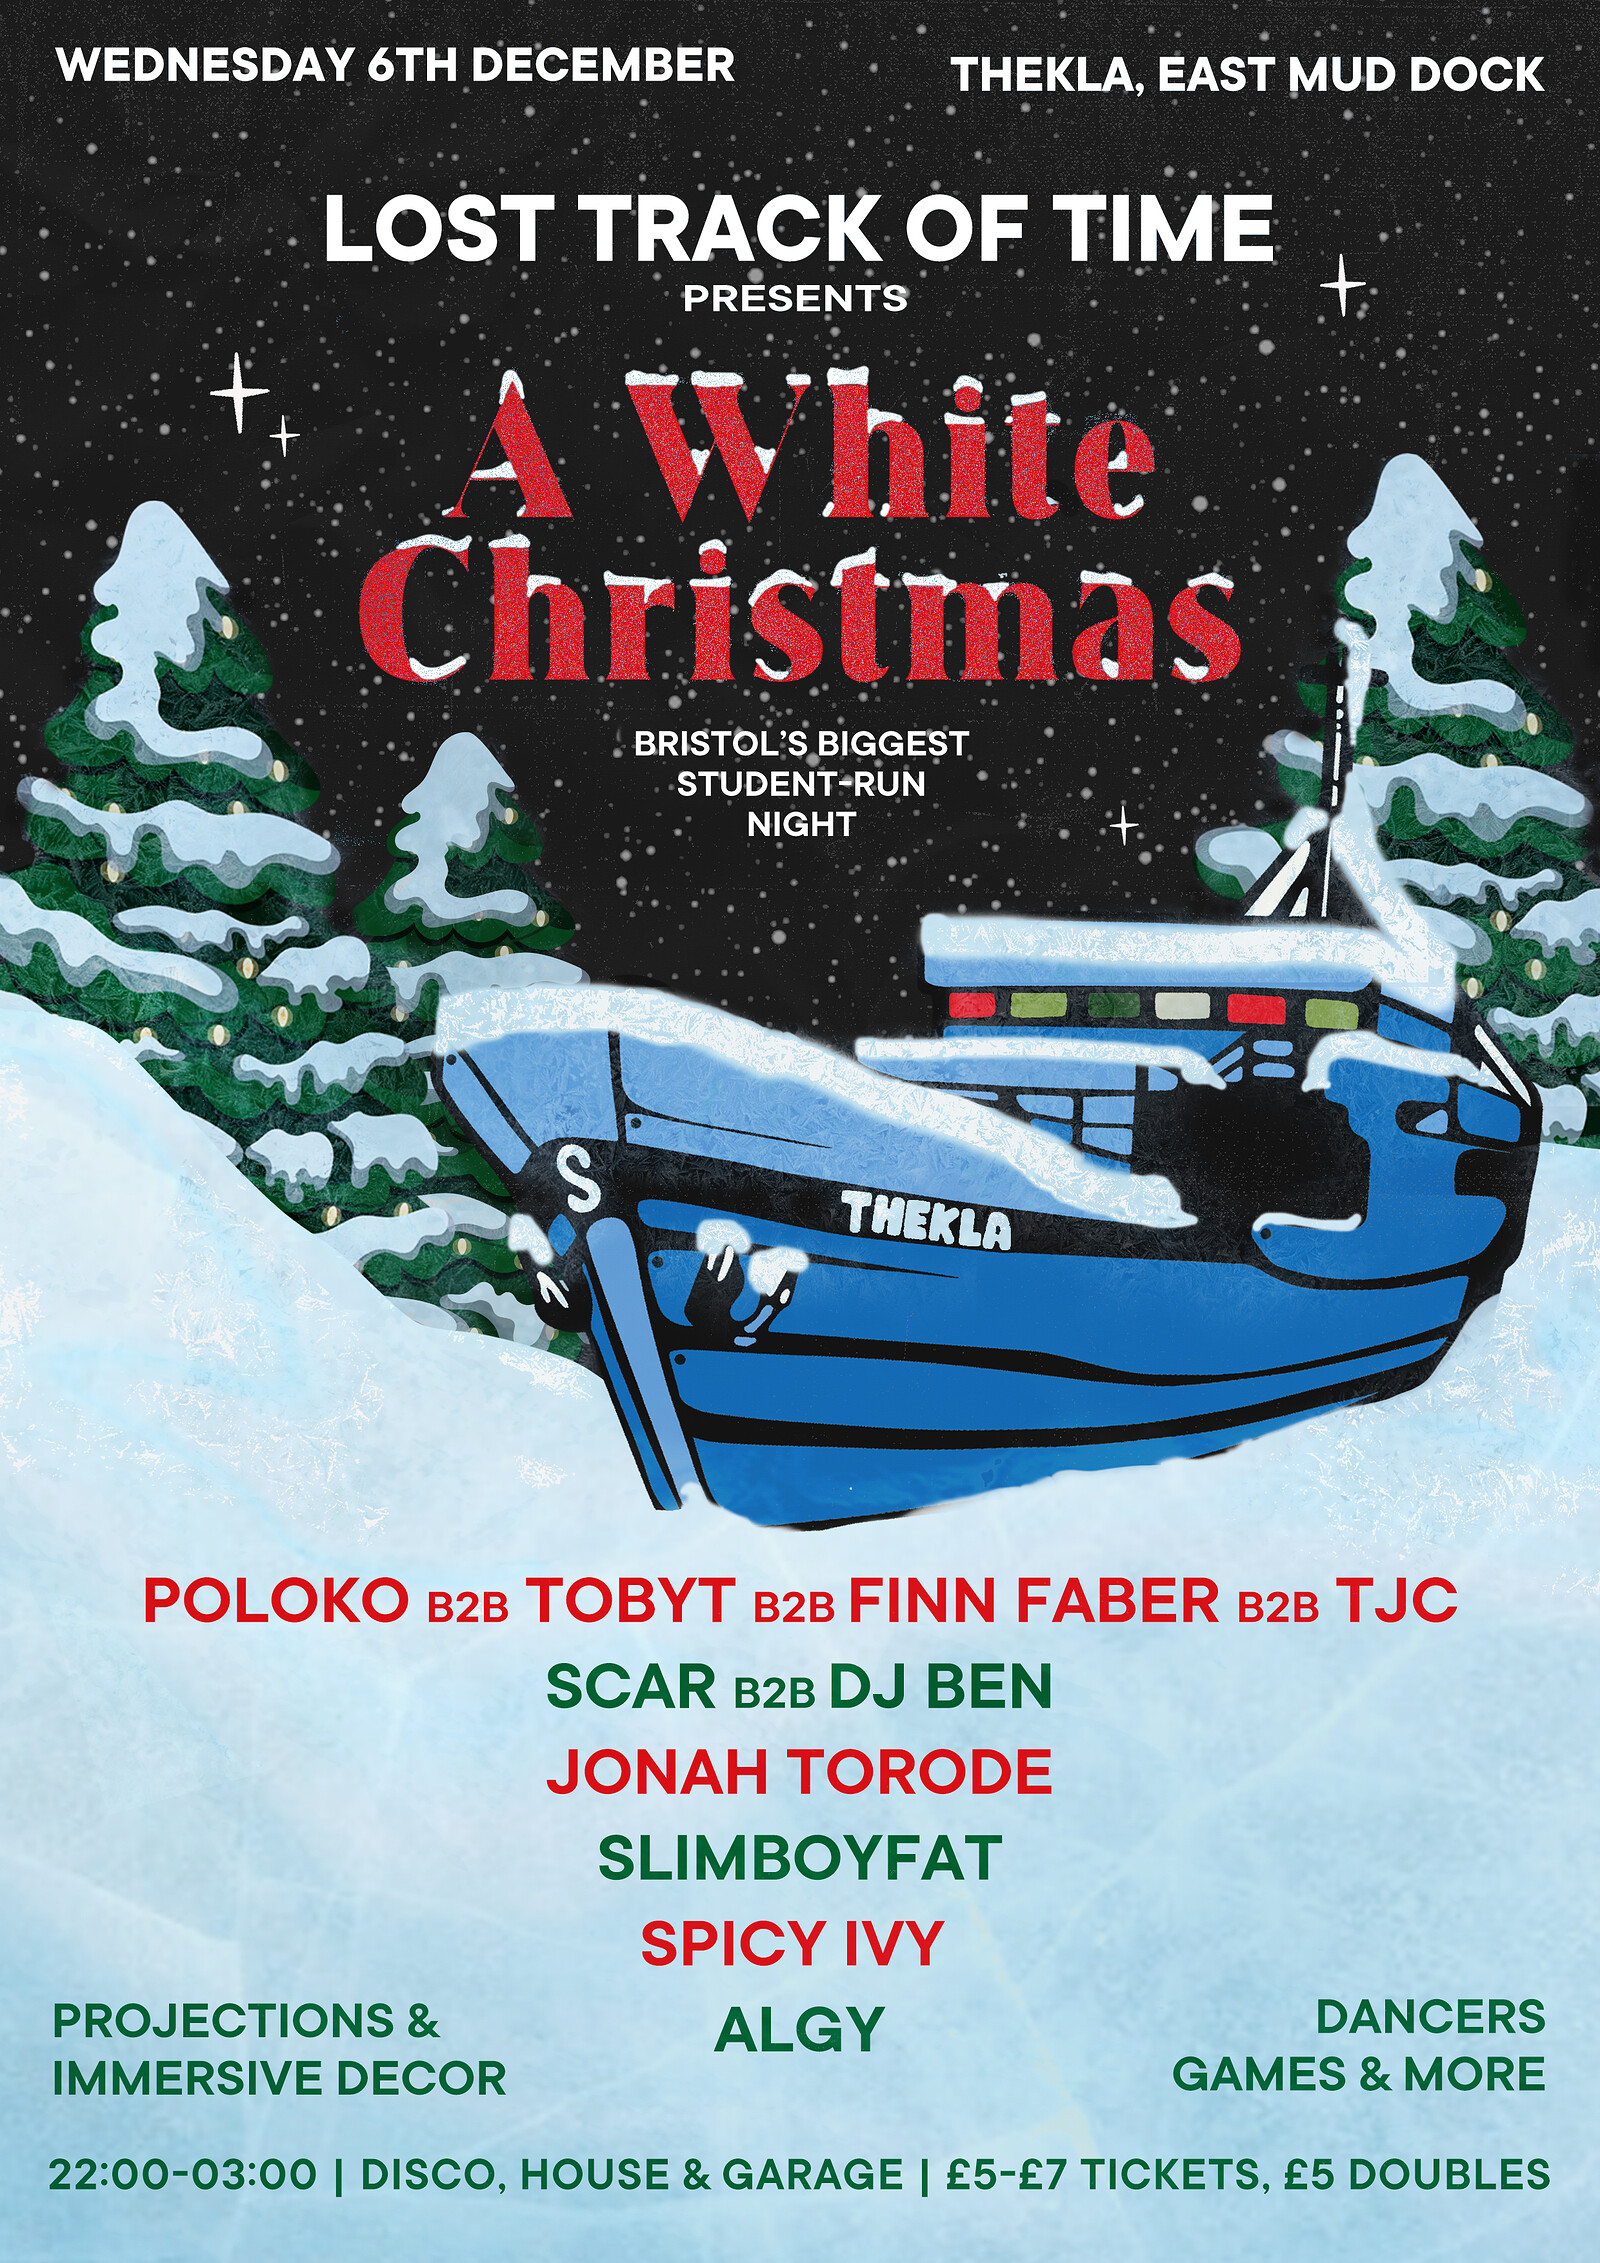 A White Christmas // Lost Track of Time at Thekla